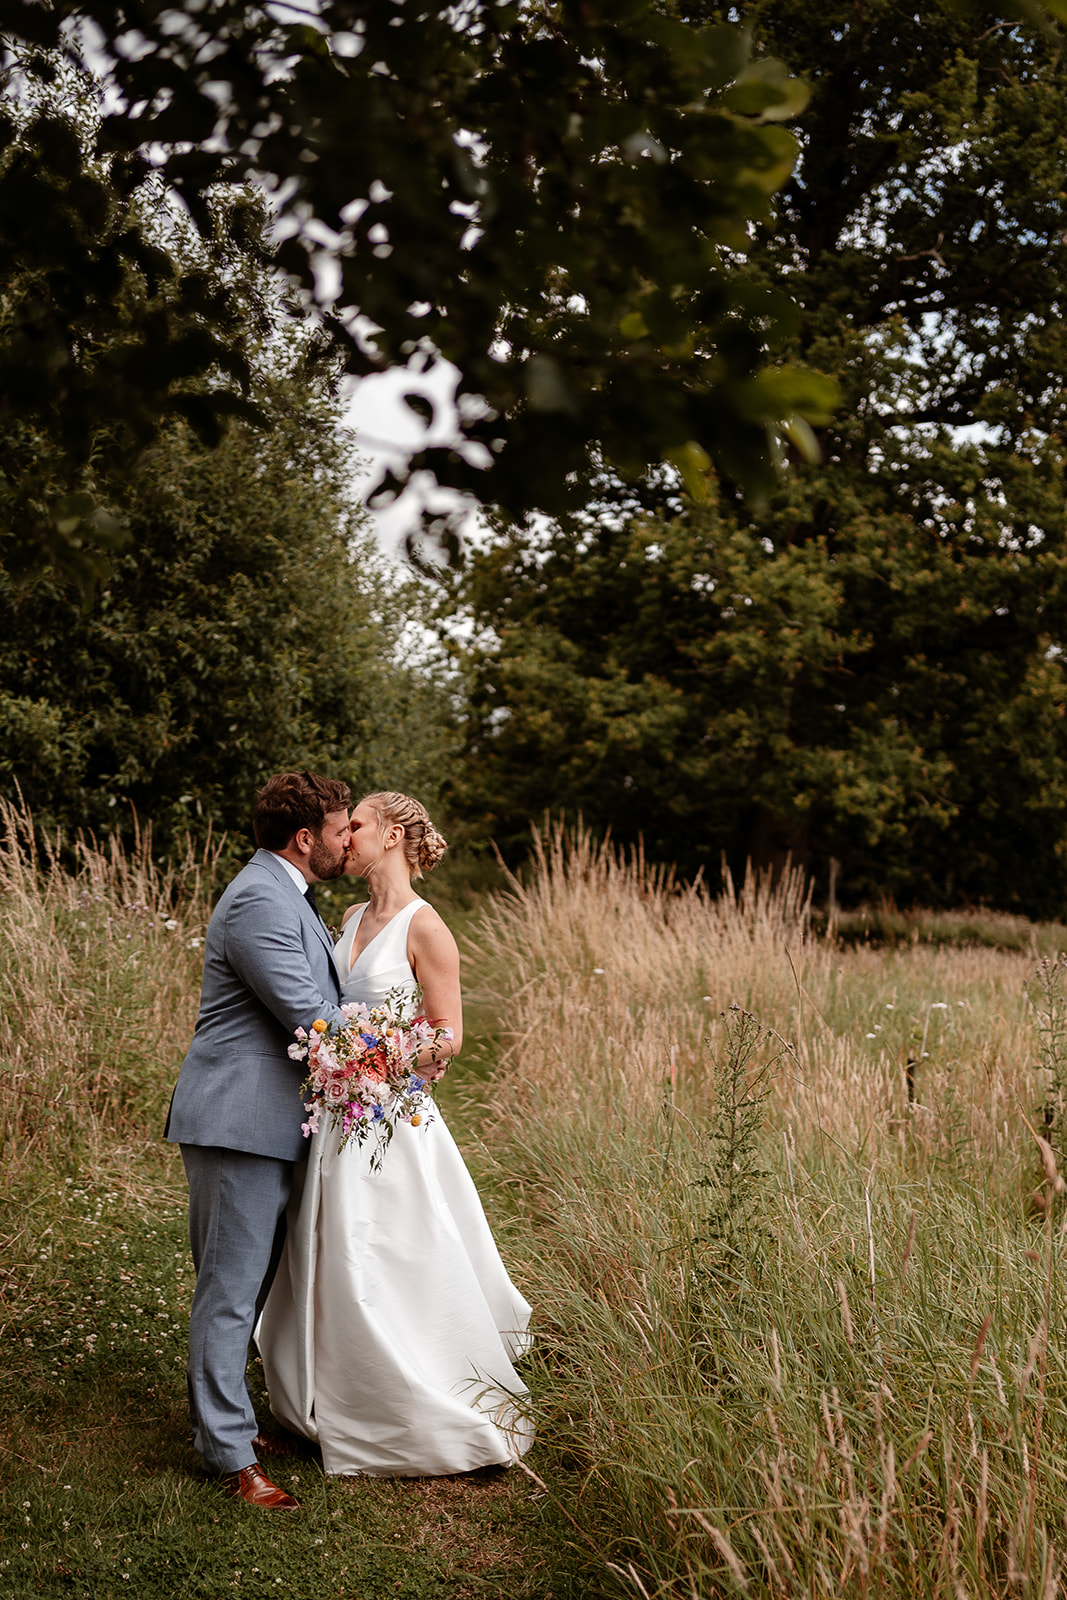 Editorial photograph of the bride and groom together in the gardens at a summer wedding at Silchester Farm